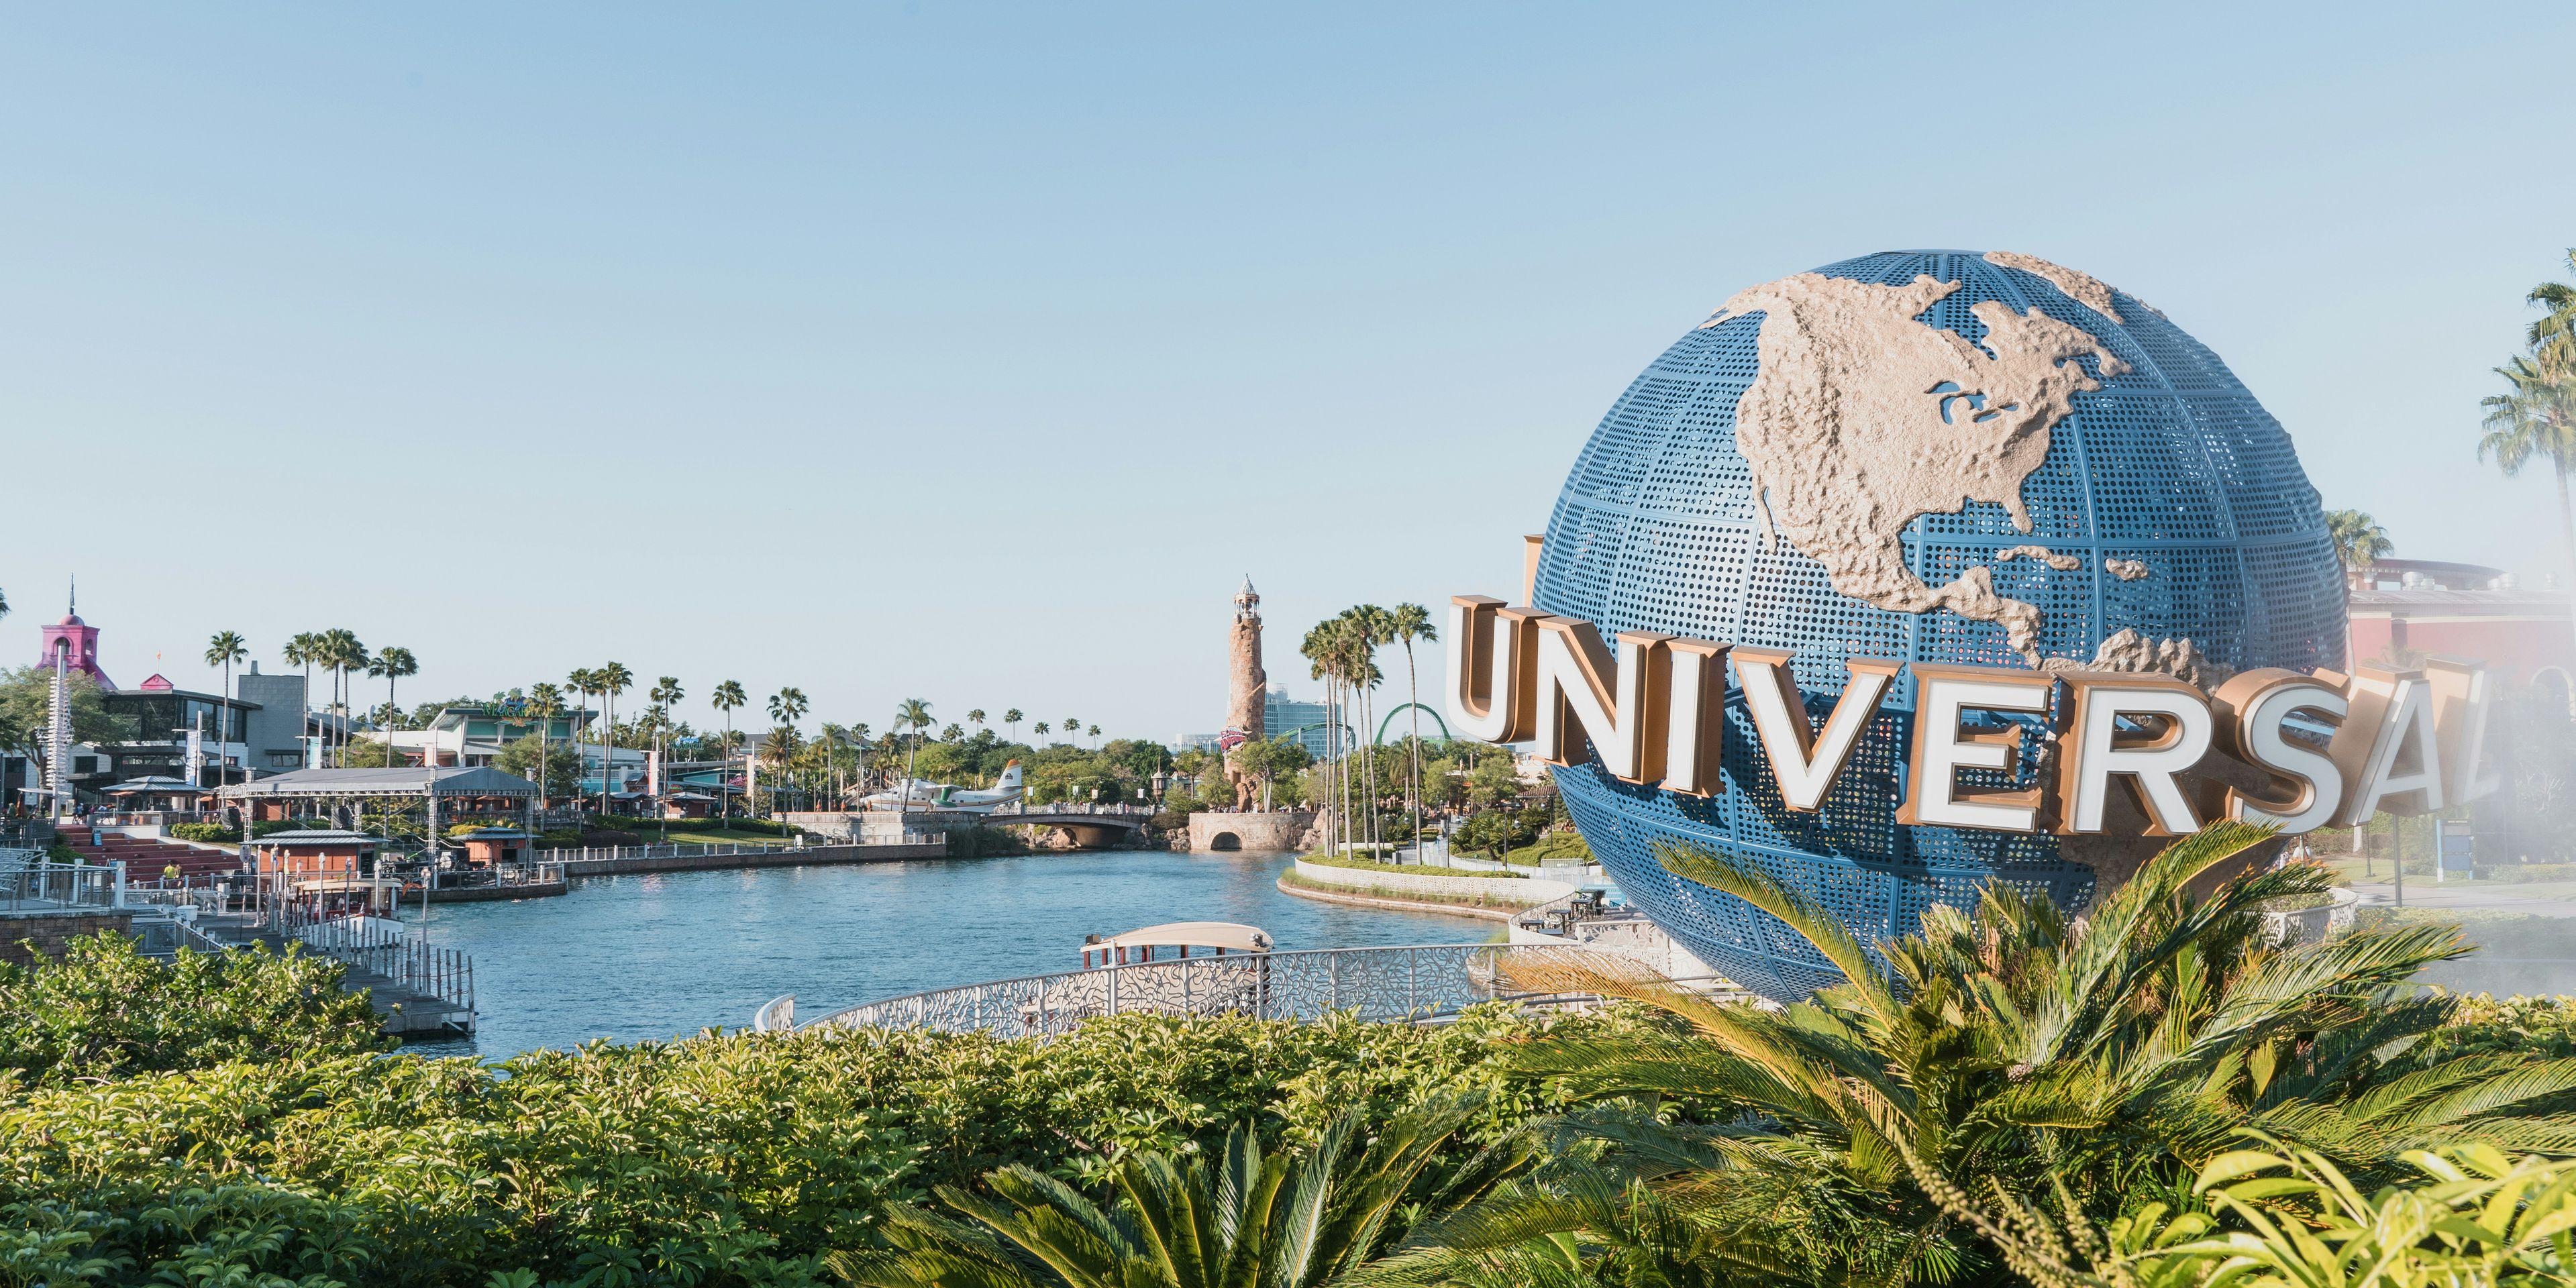 the universal studios globe is surrounded by palm trees and a body of water .